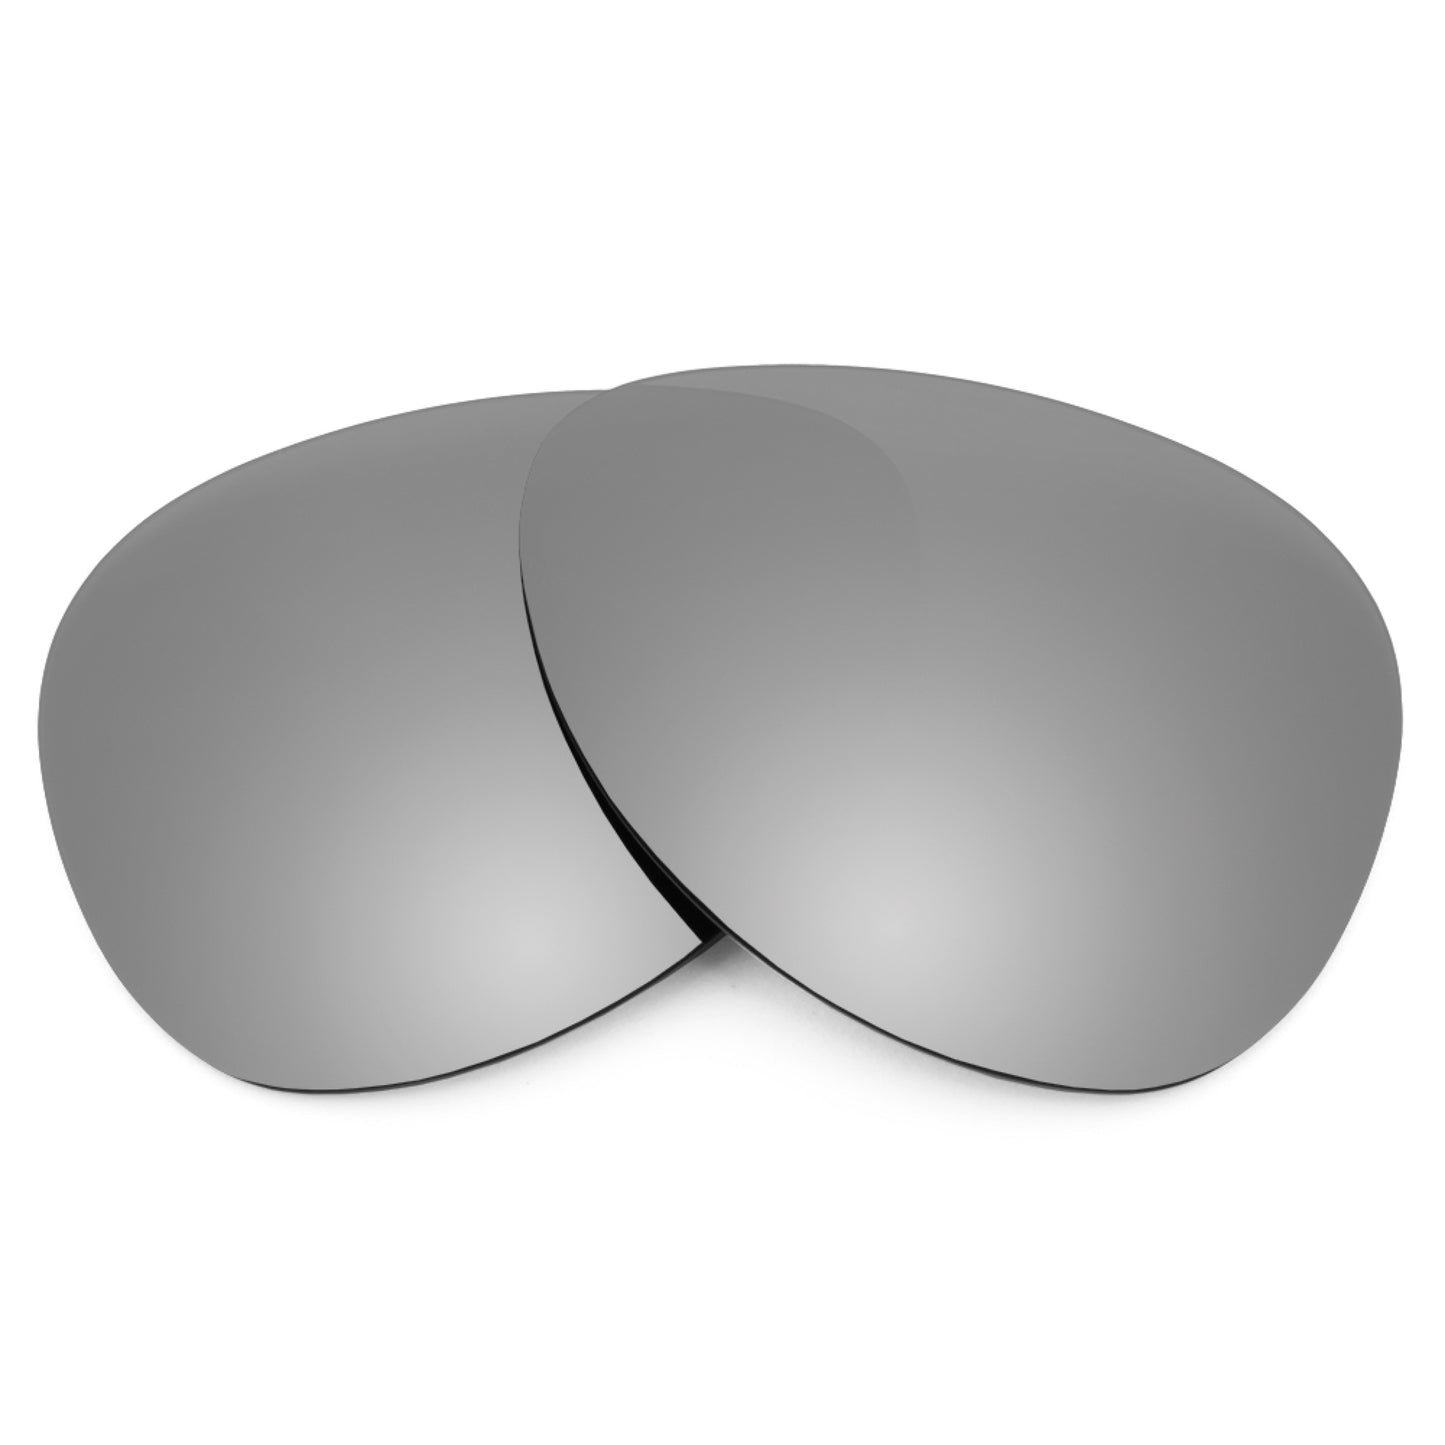 Revant replacement lenses for Ray-Ban Gatsby II RB4257 50mm Non-Polarized Titanium